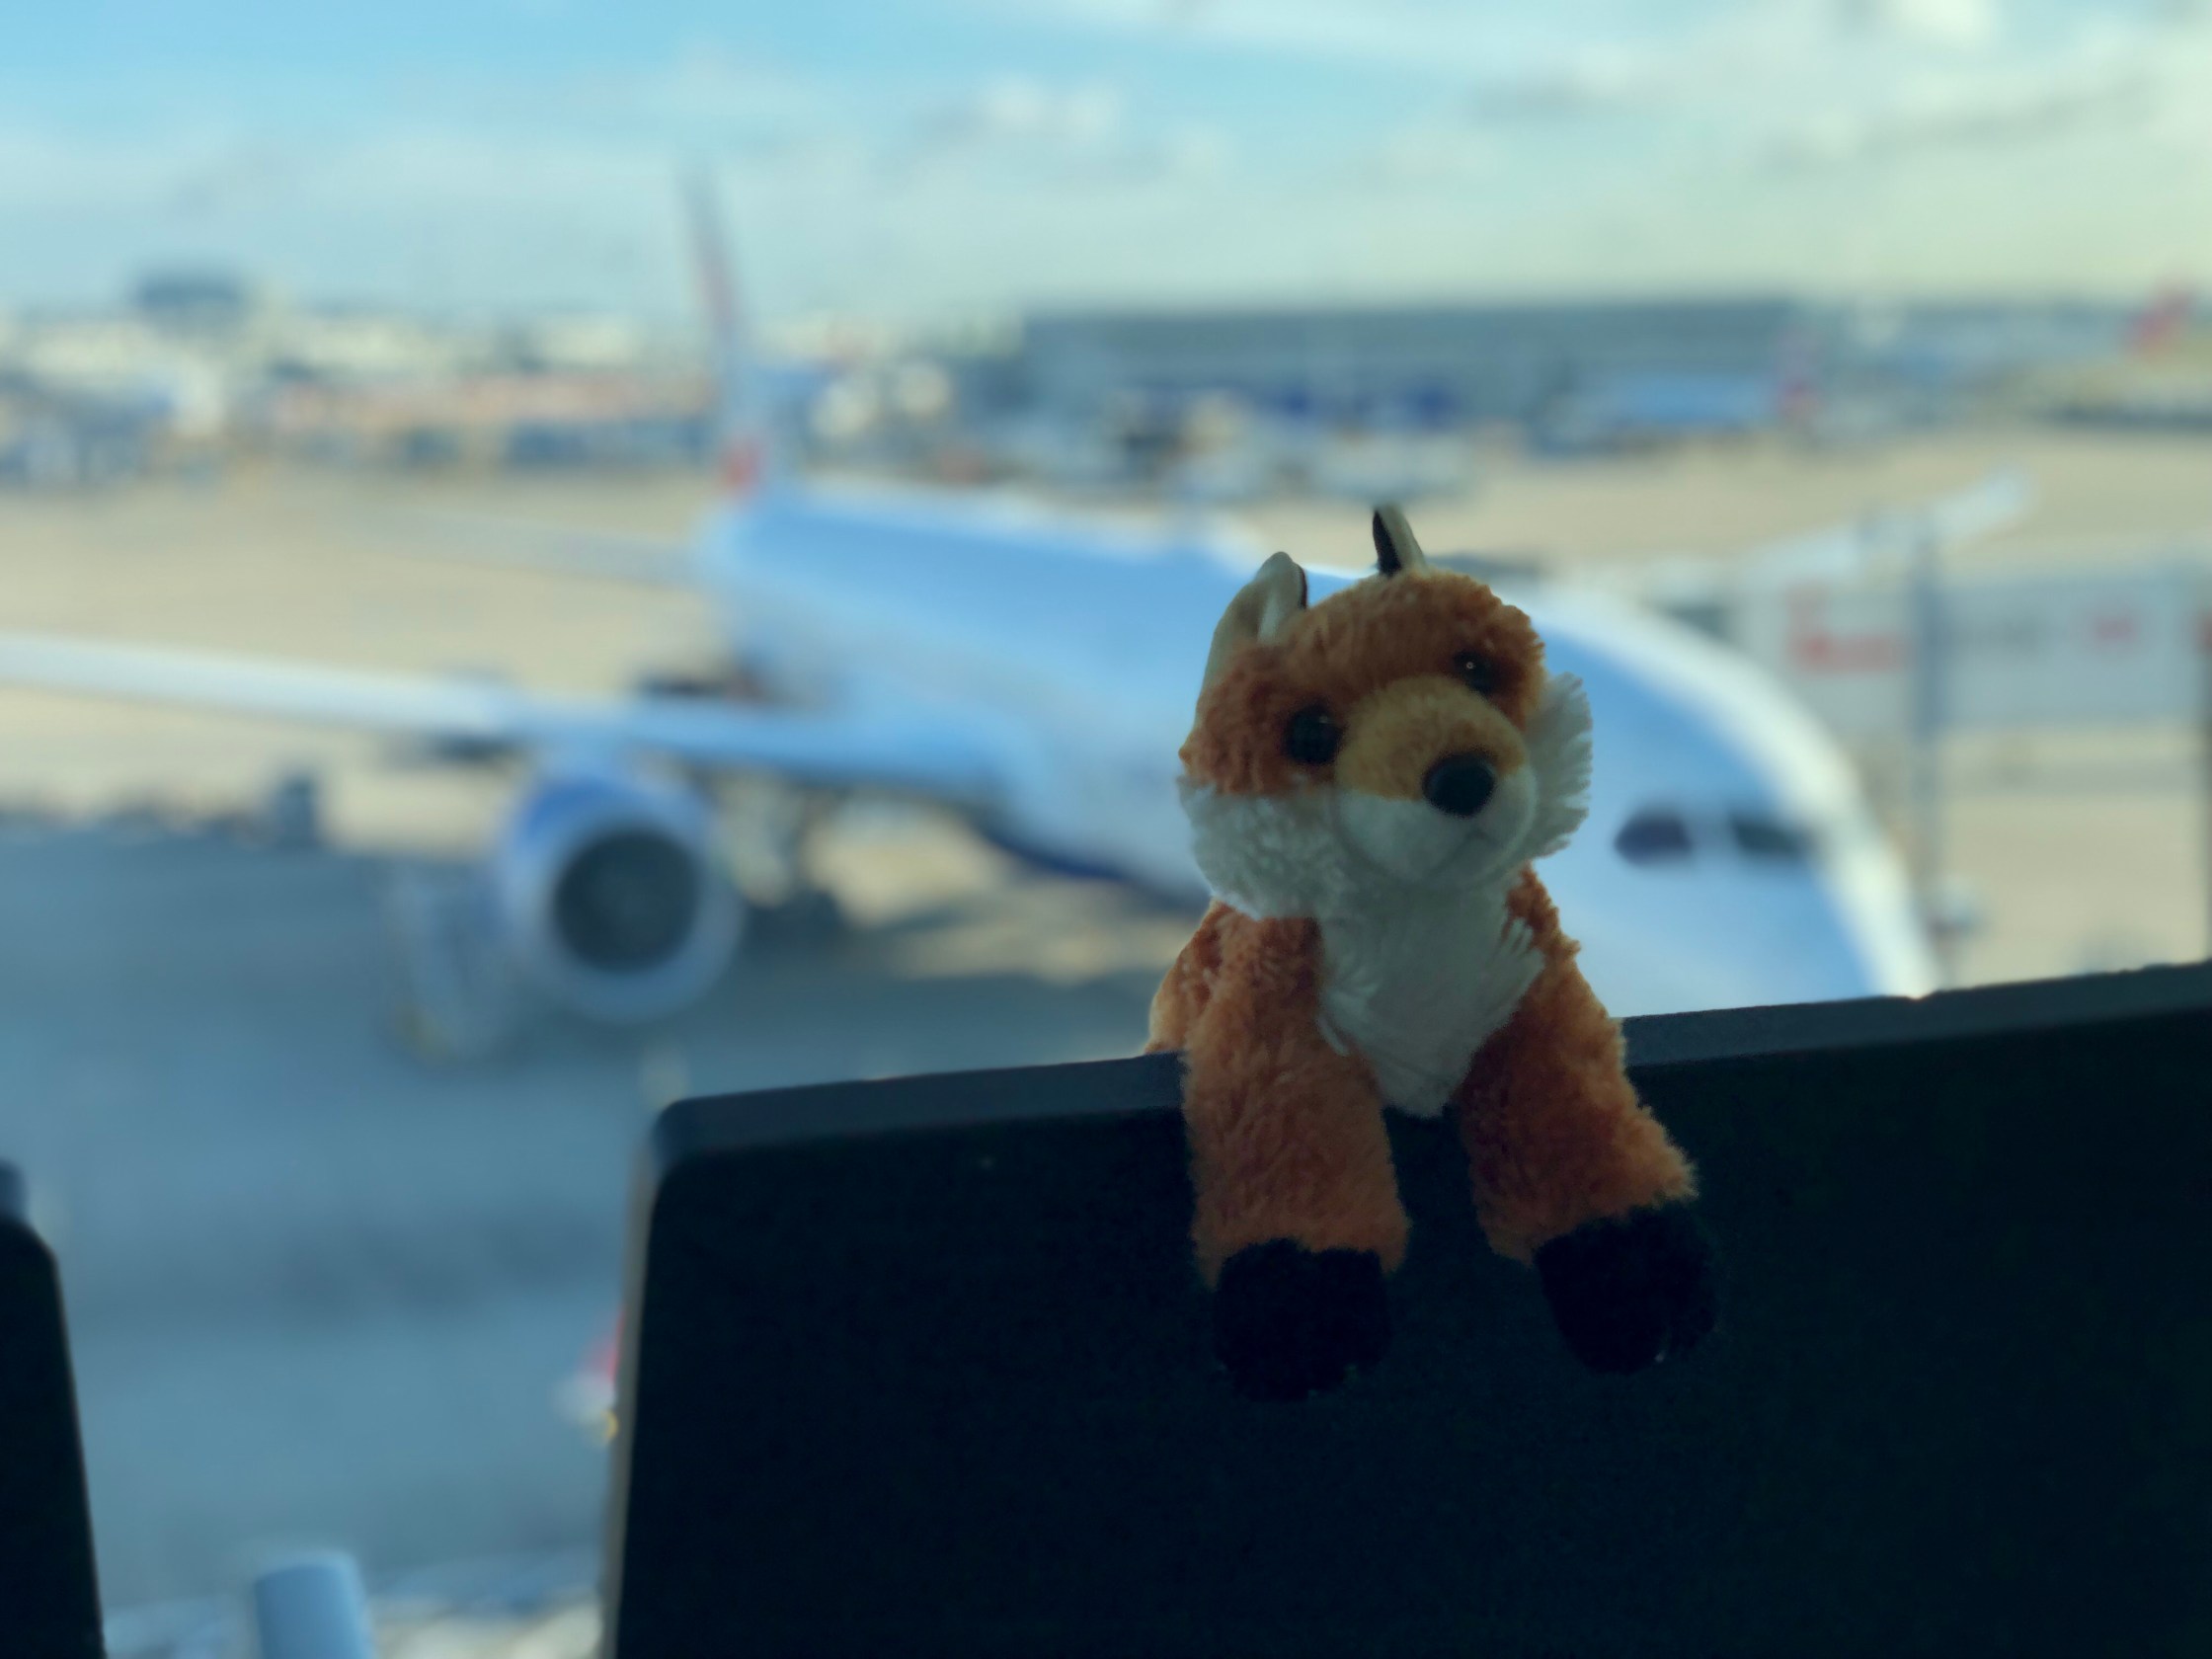 Stuffed animal on a chair at an airport.